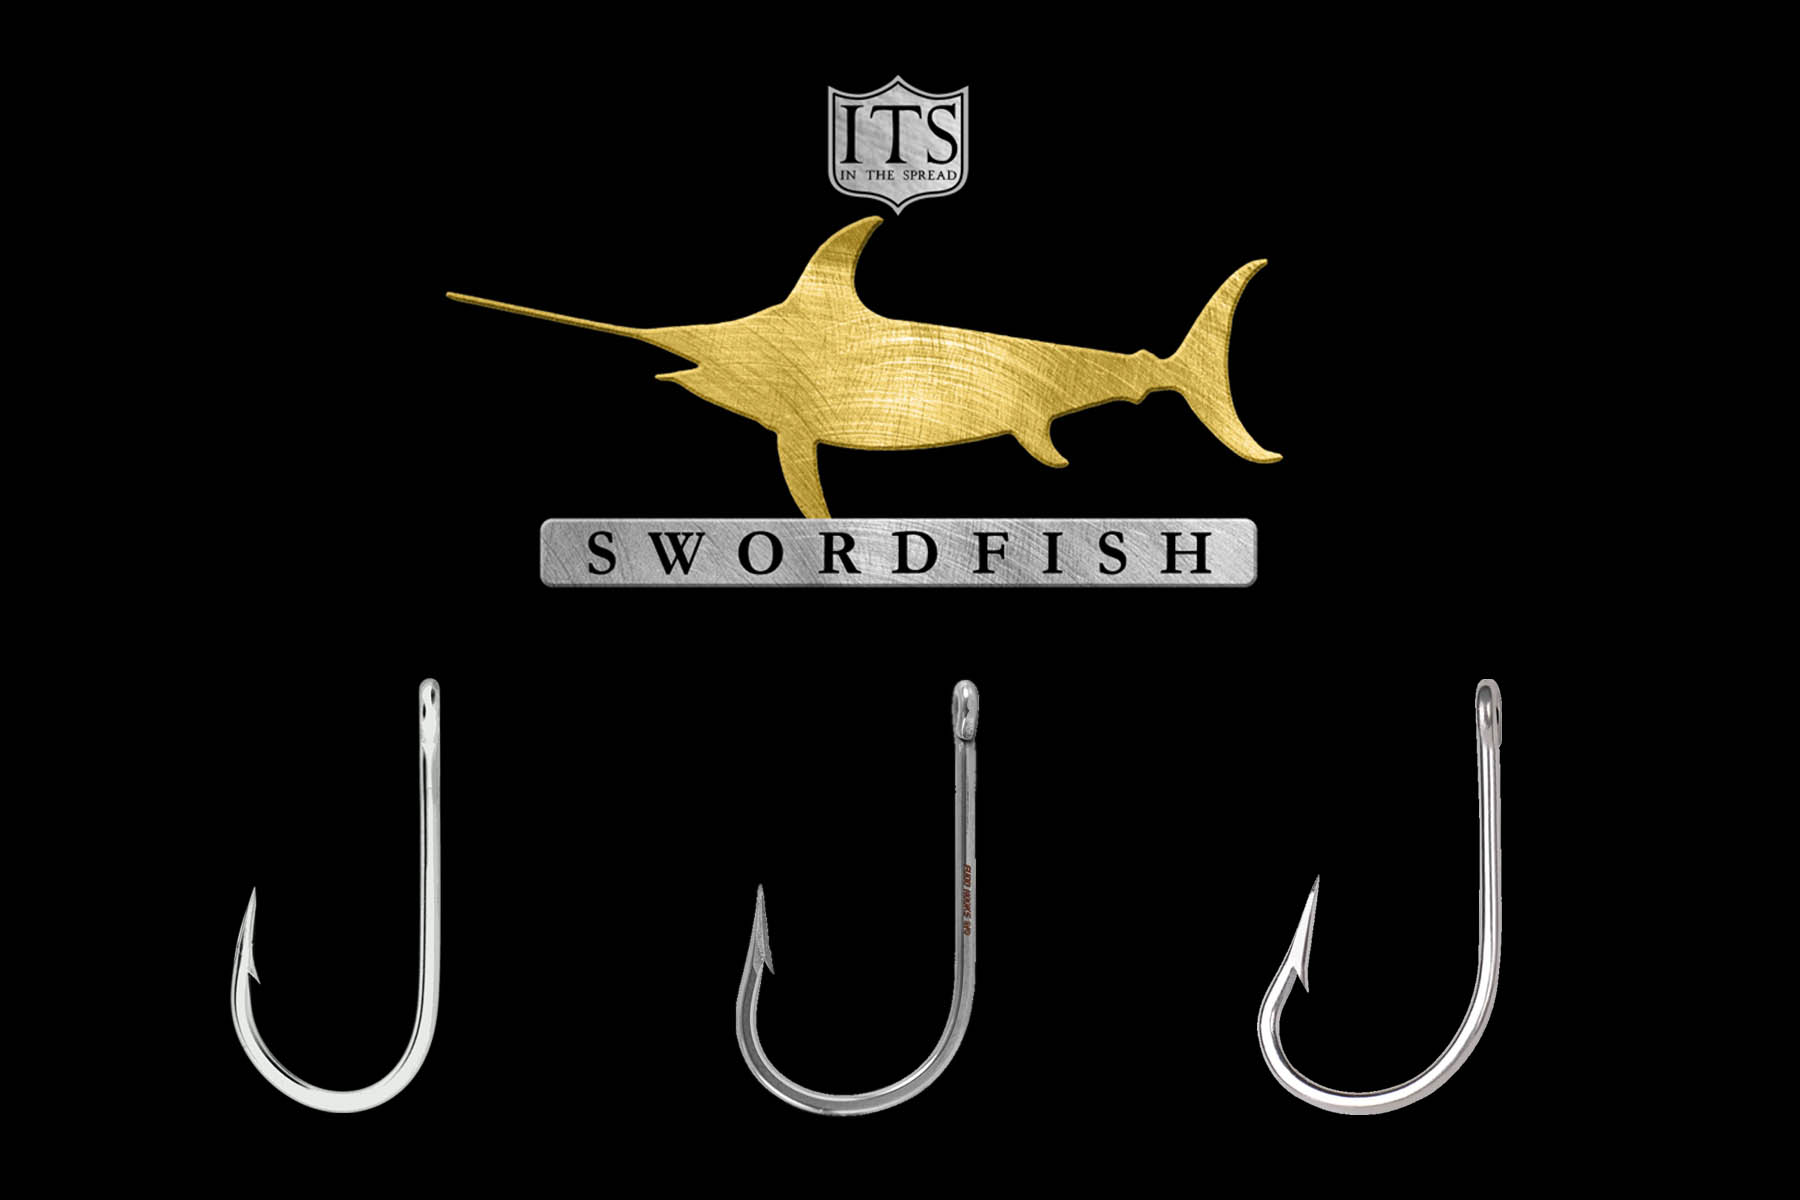 Quality, durable Japanese Fish Hook for different species 